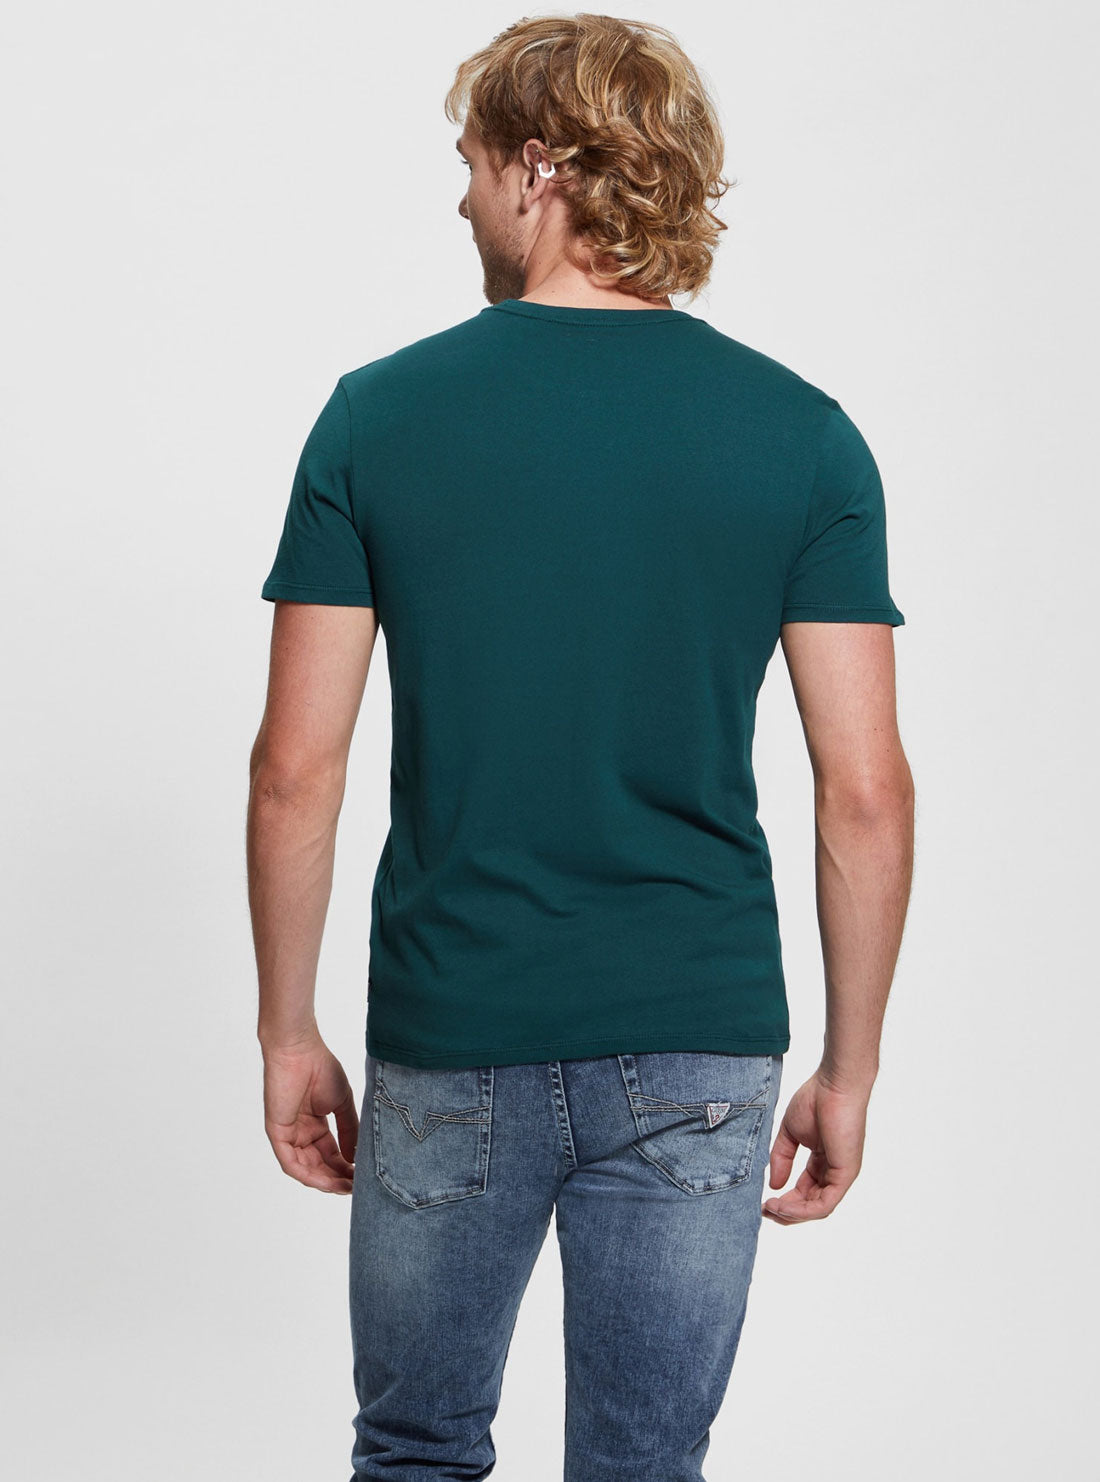 GUESS Eco Green Short Sleeve T-Shirt back view